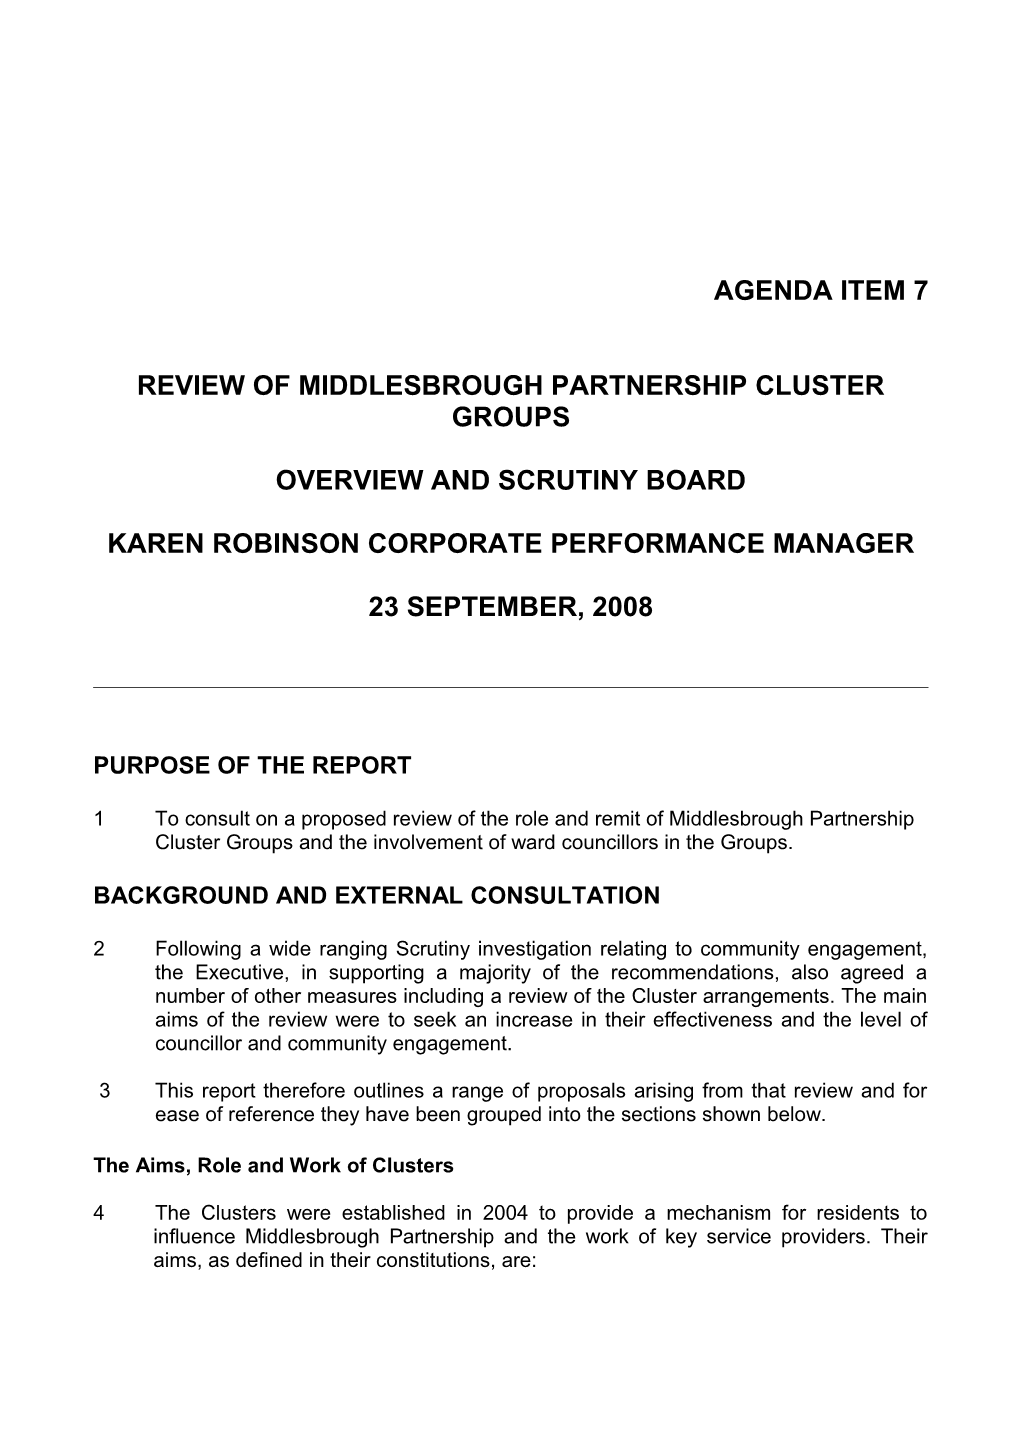 Review of Middlesbrough Partnership Cluster Groups